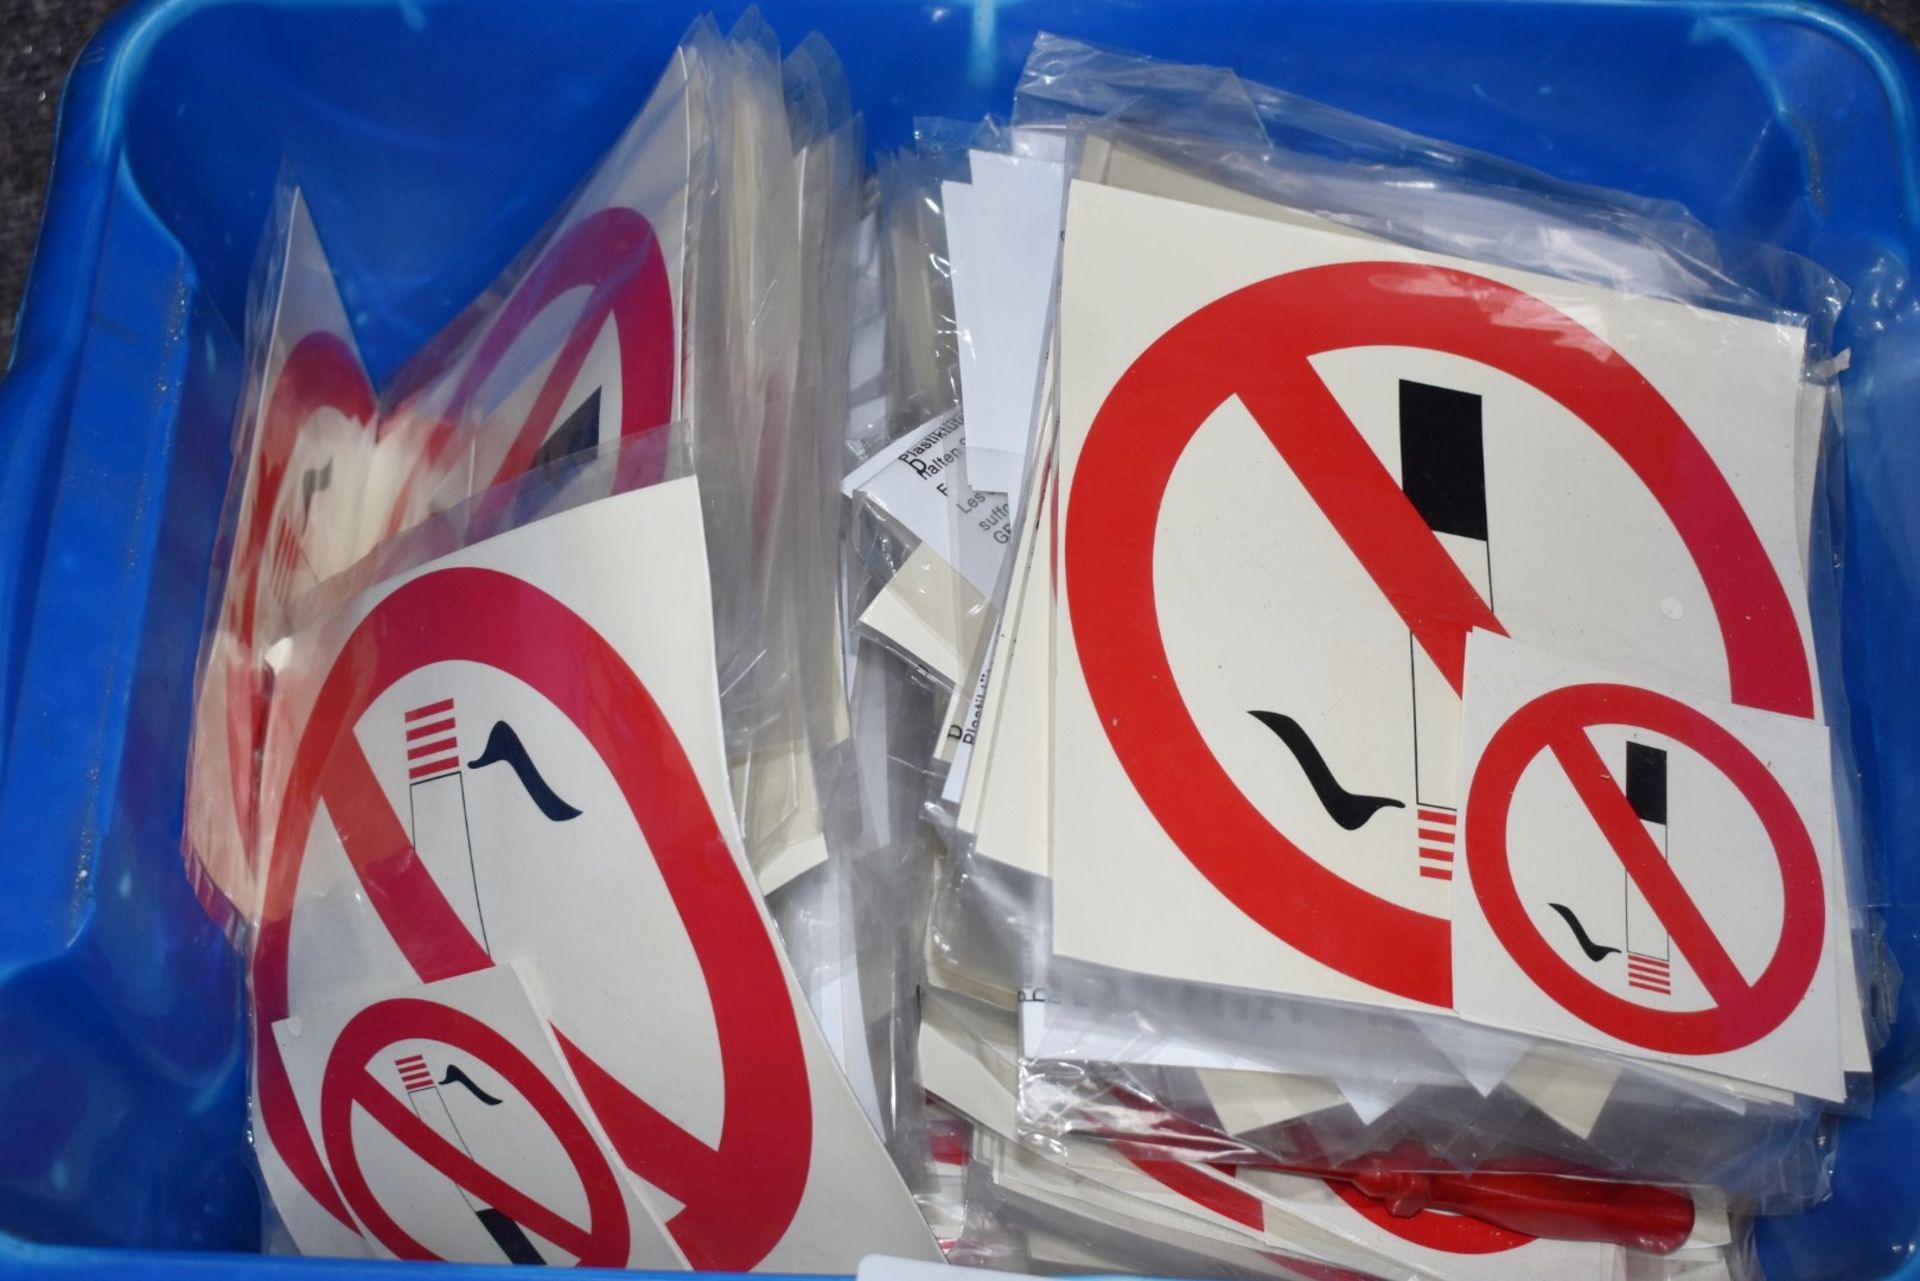 1 x Large Box of NO SMOKING STICKERS - Over 100 Brand New Multi Packs of Stickers Including Small - Image 4 of 6